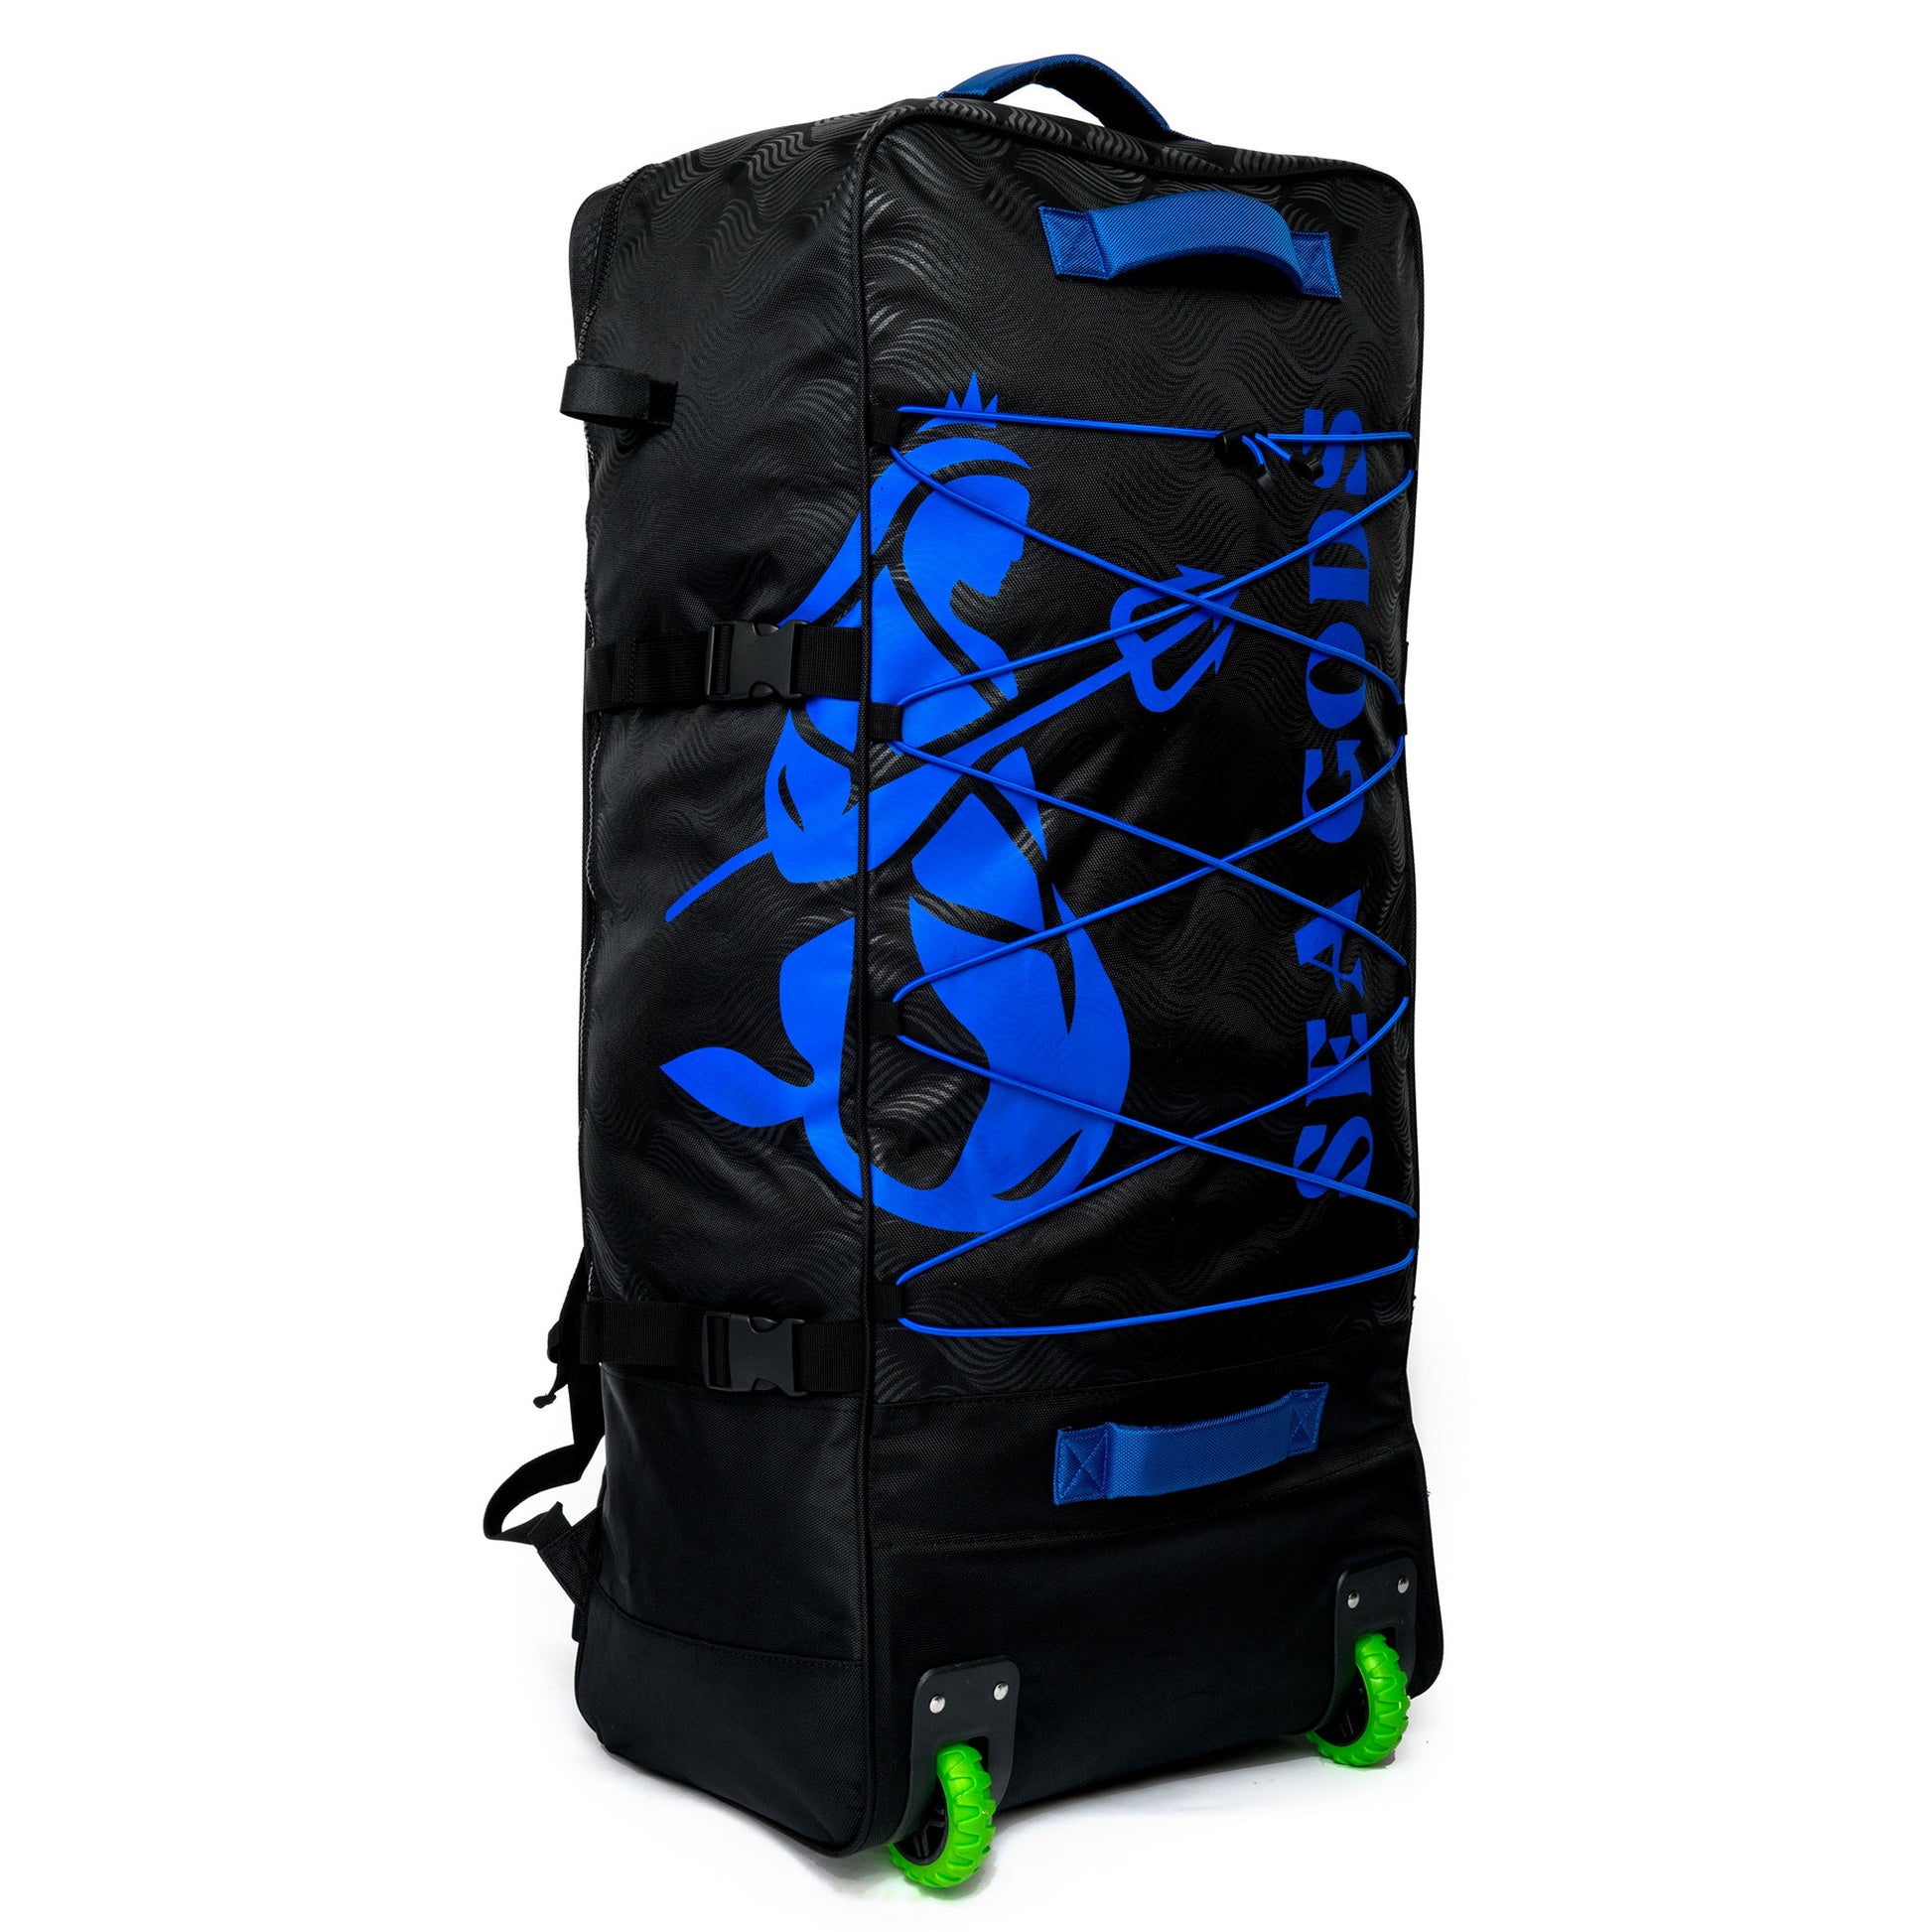 Sea gods stand up paddleboard carry bag with wheels and tie downs